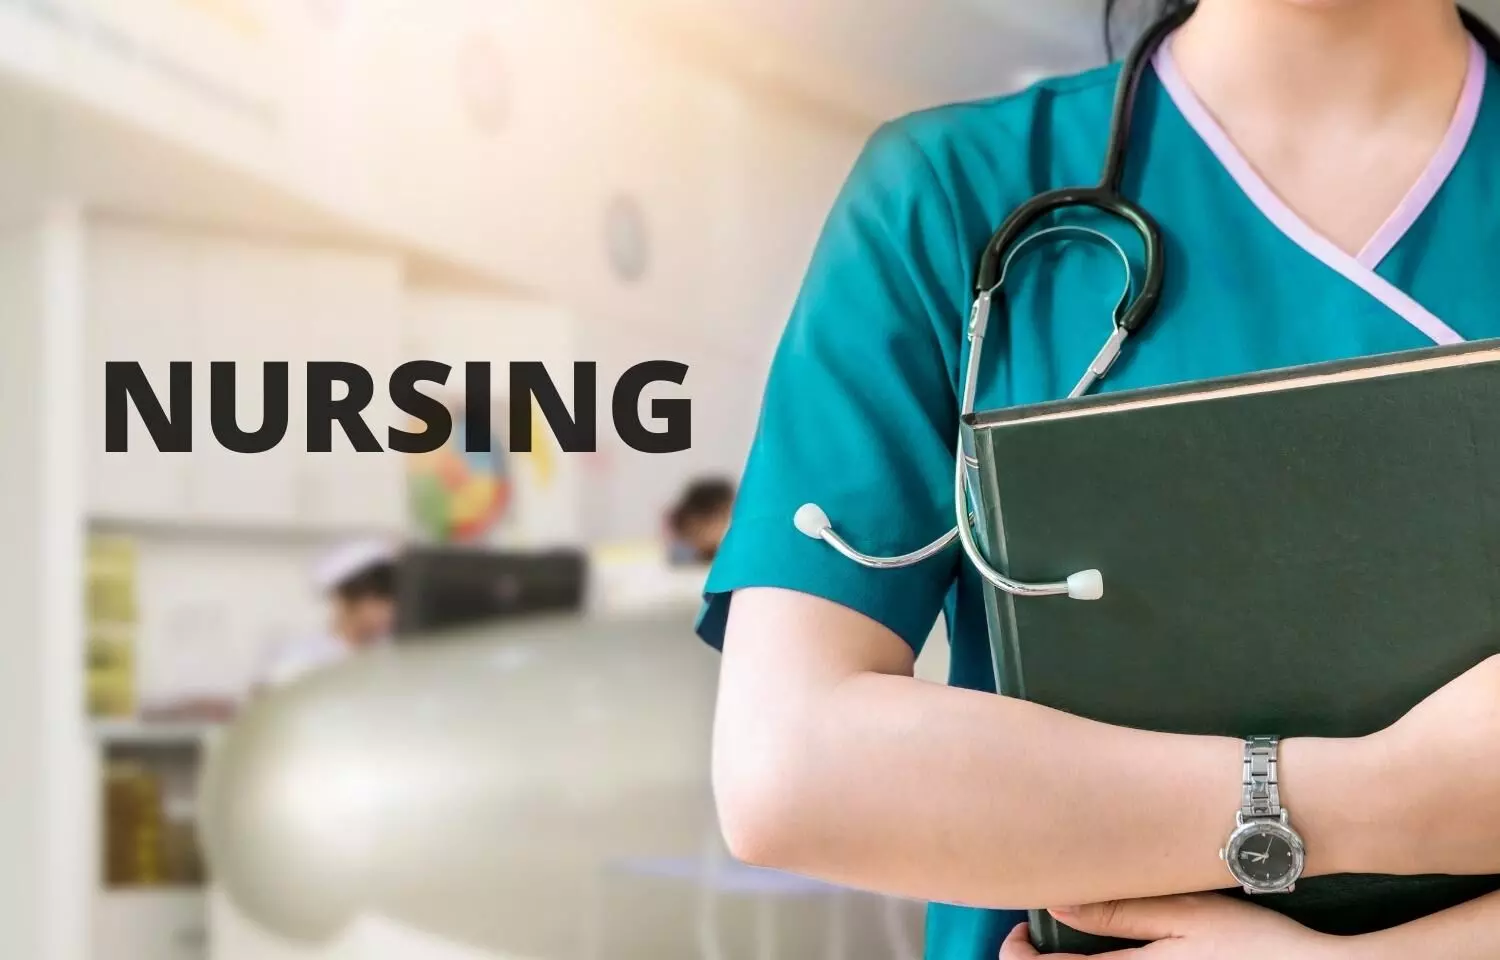 Post Basic BSc Nursing Admissions in Tamil Nadu, Check out Online Counselling Schedule, Provisional Merit Lists